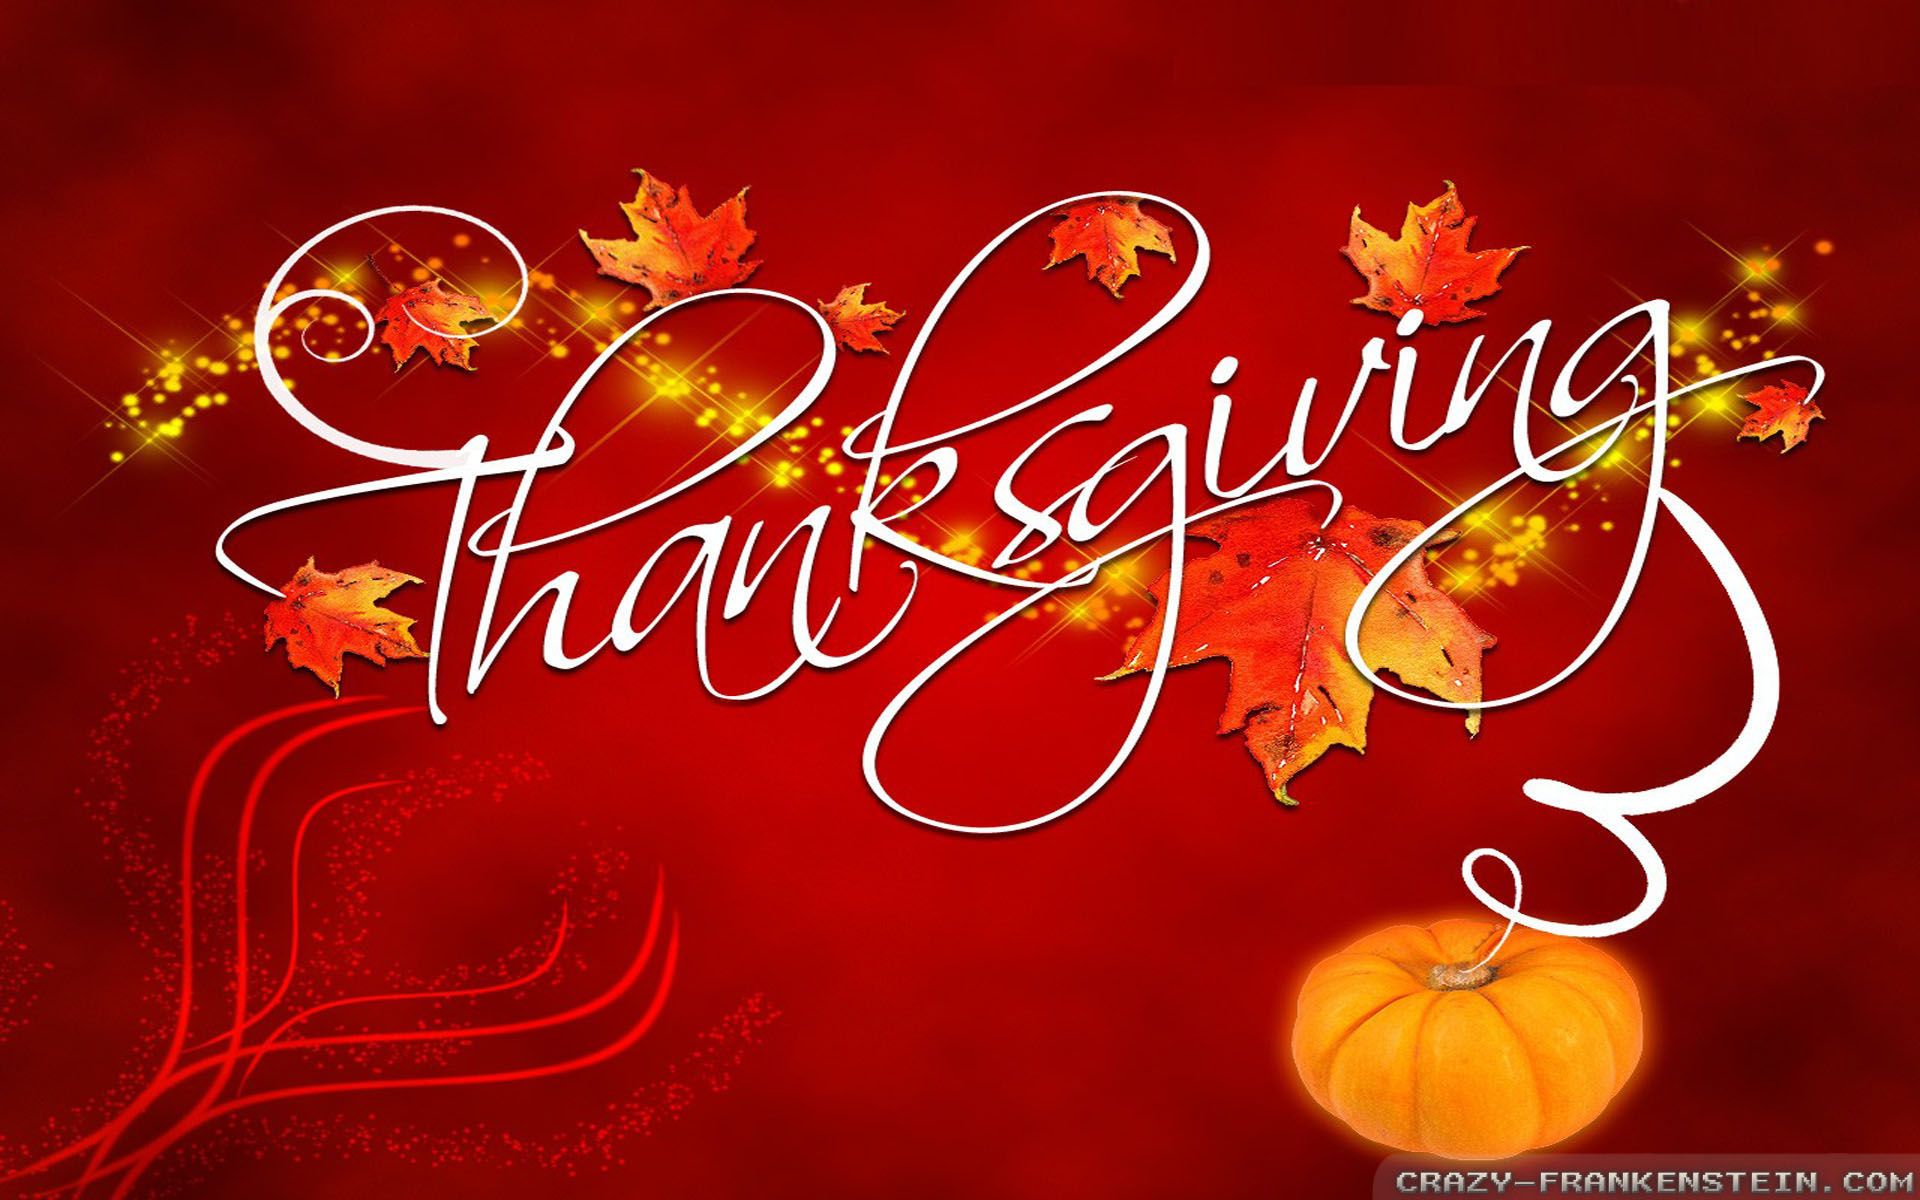 Thanksgiving wallpaper for Windows 7/8.1/10 | All for Windows 10 Free